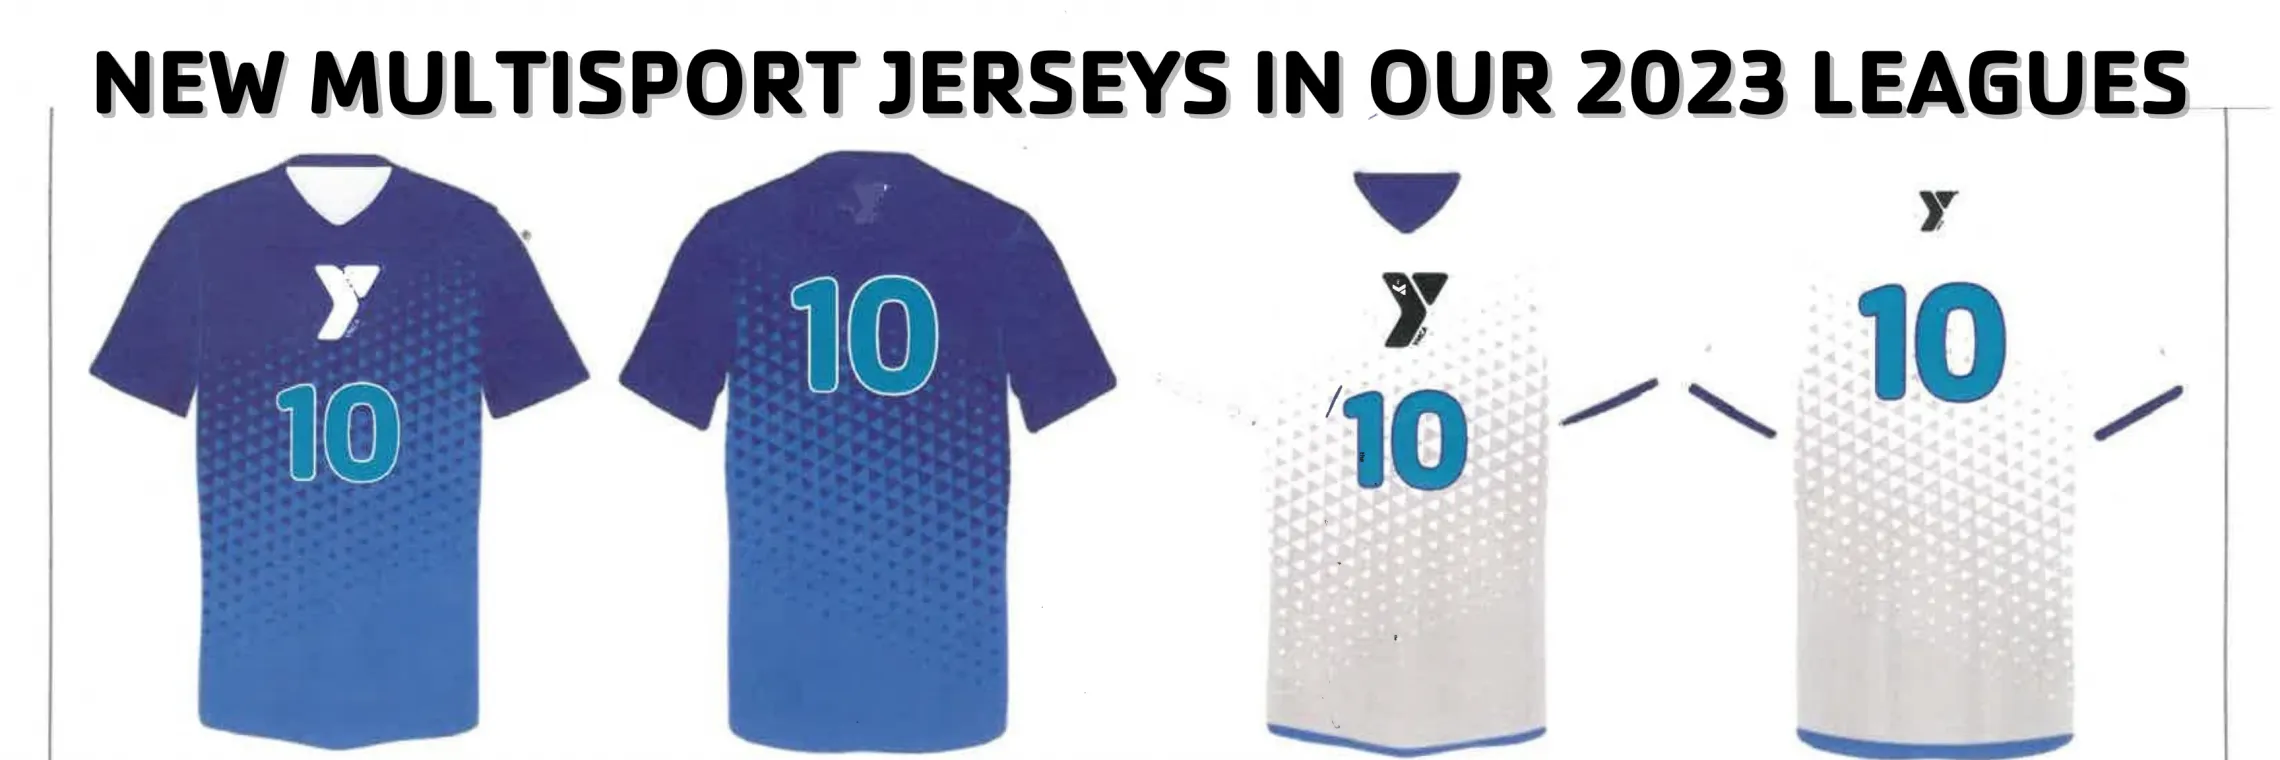 New Multisports Jerseys for our 2023 league